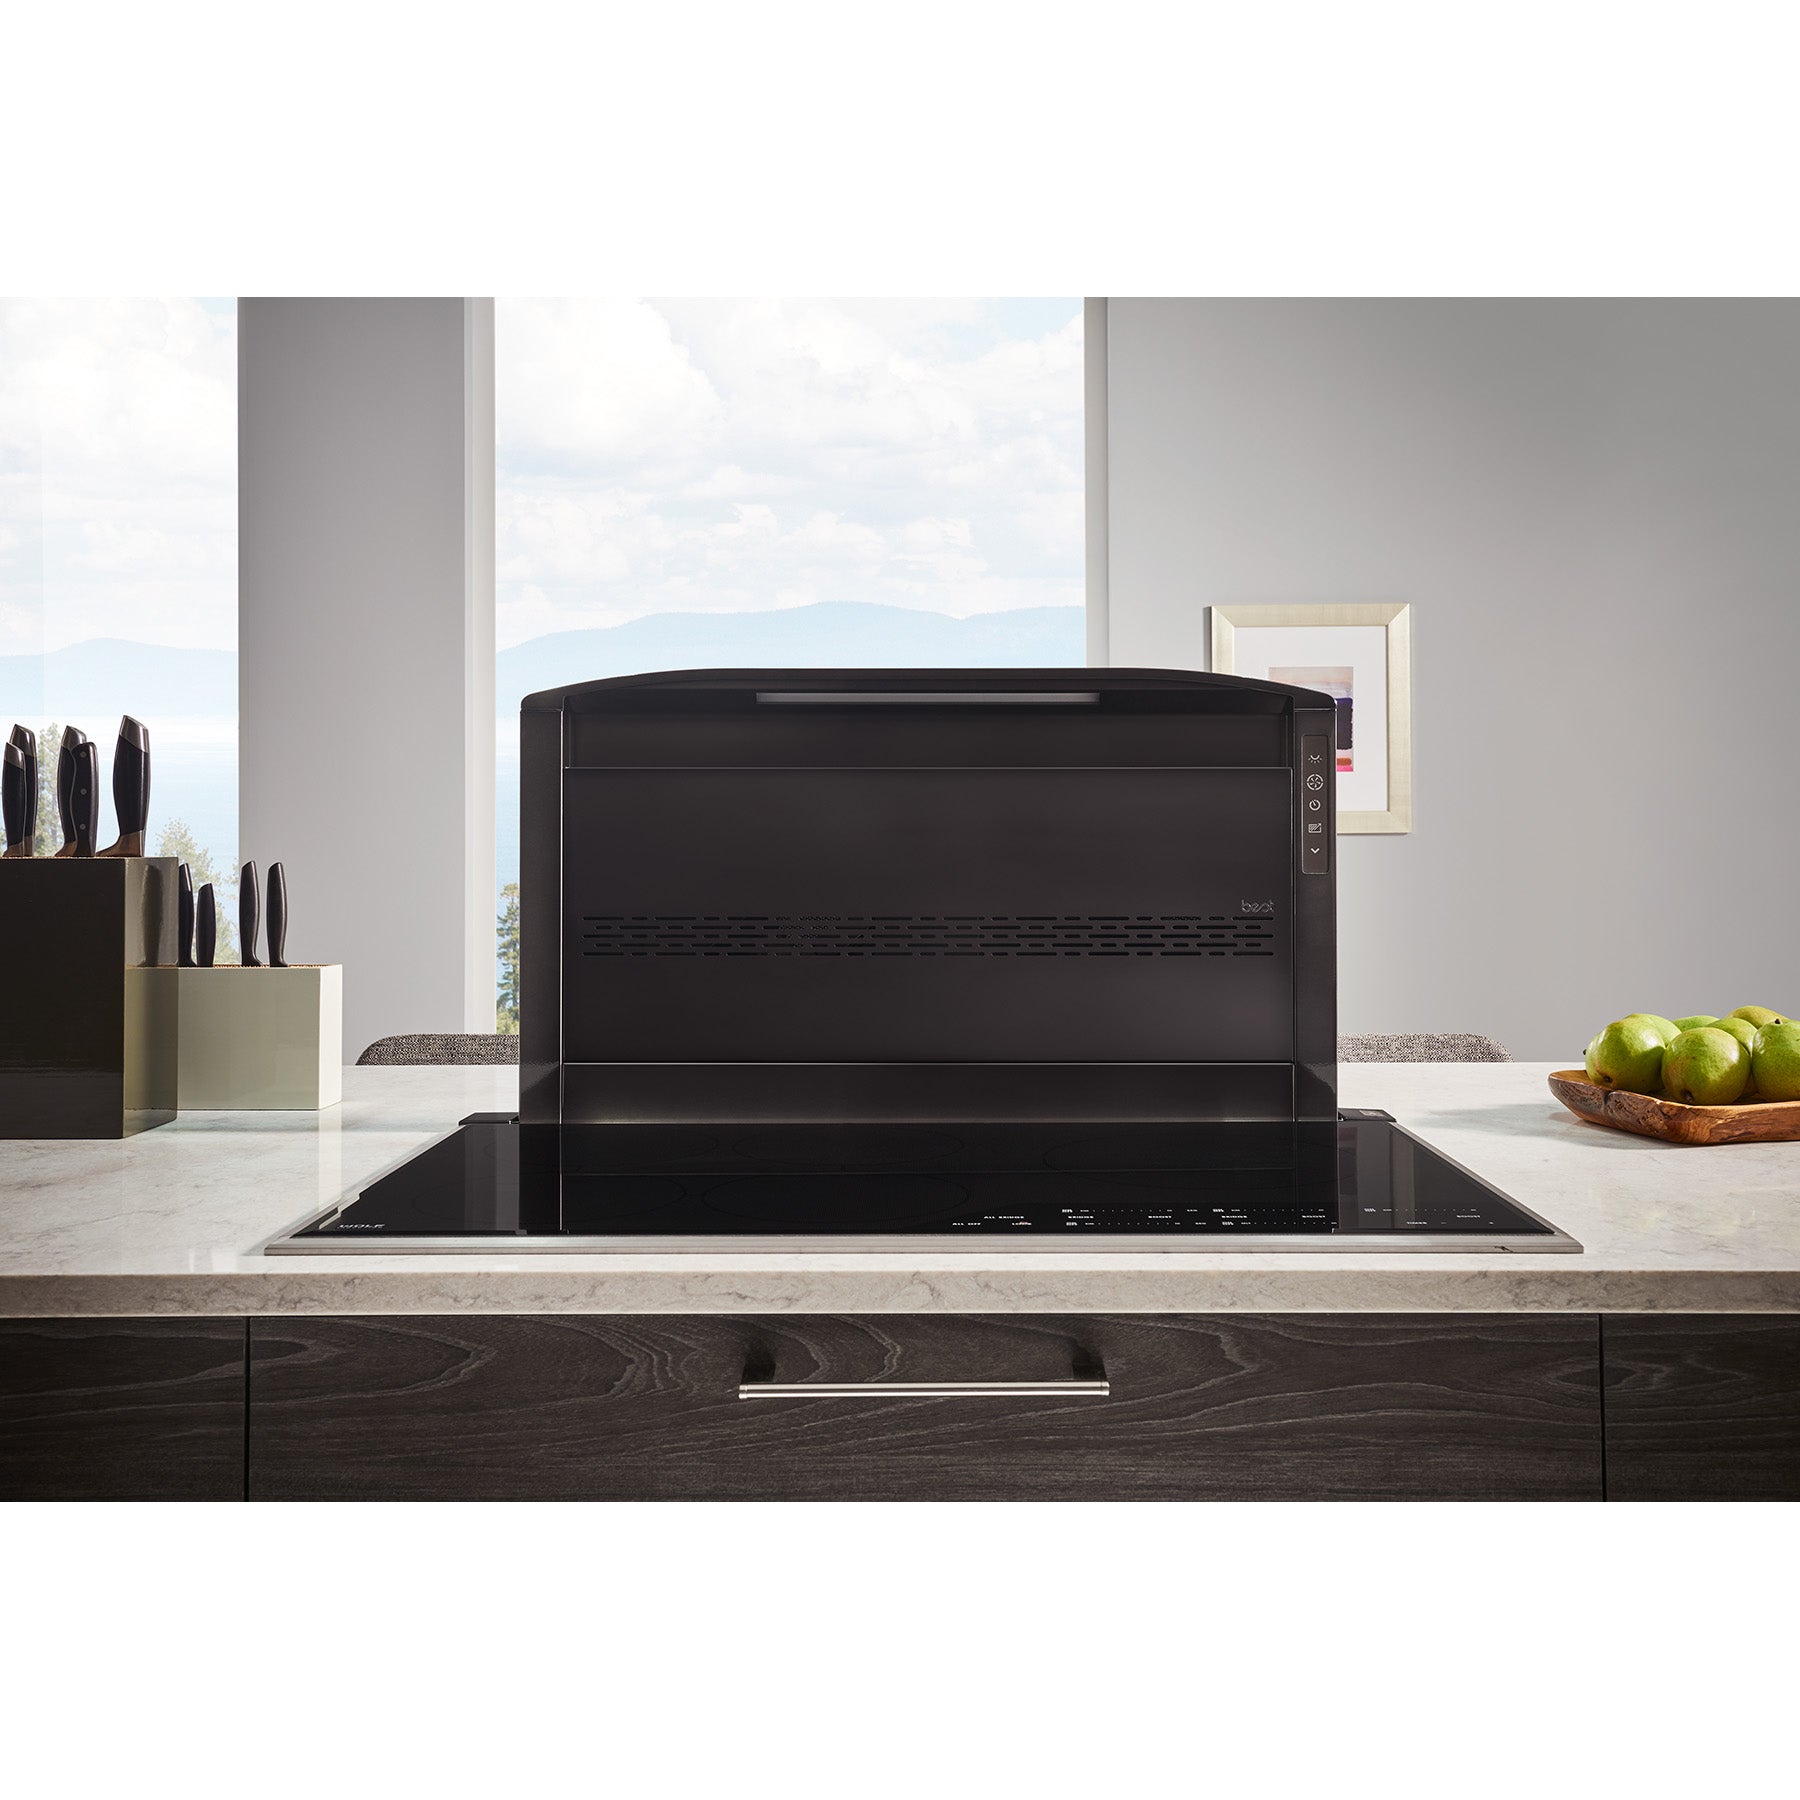 Best - 36 Inch Downdraft Vent in Black Stainless - D49M36BLS